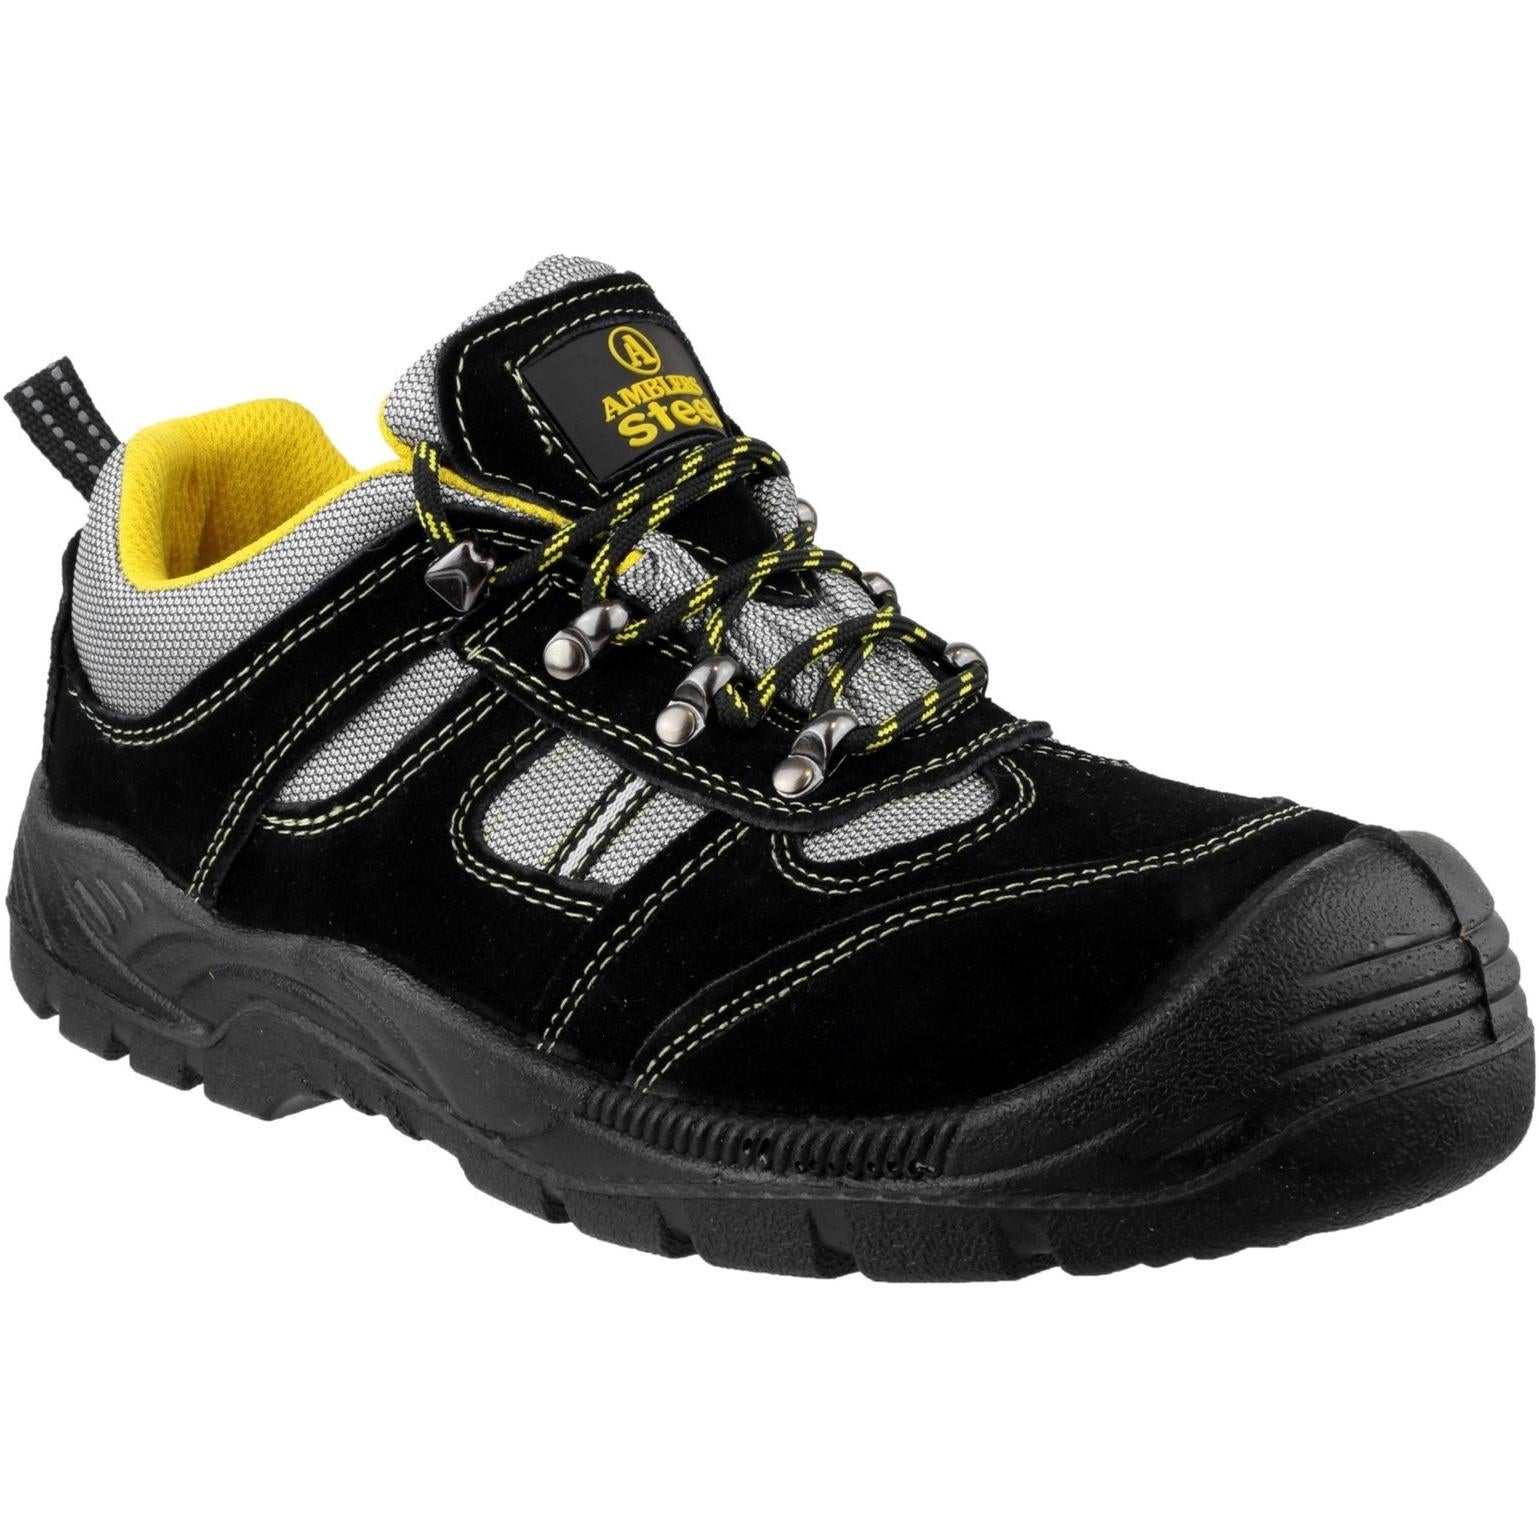 Amblers Safety FS111 Lightweight Lace up Safety Trainer